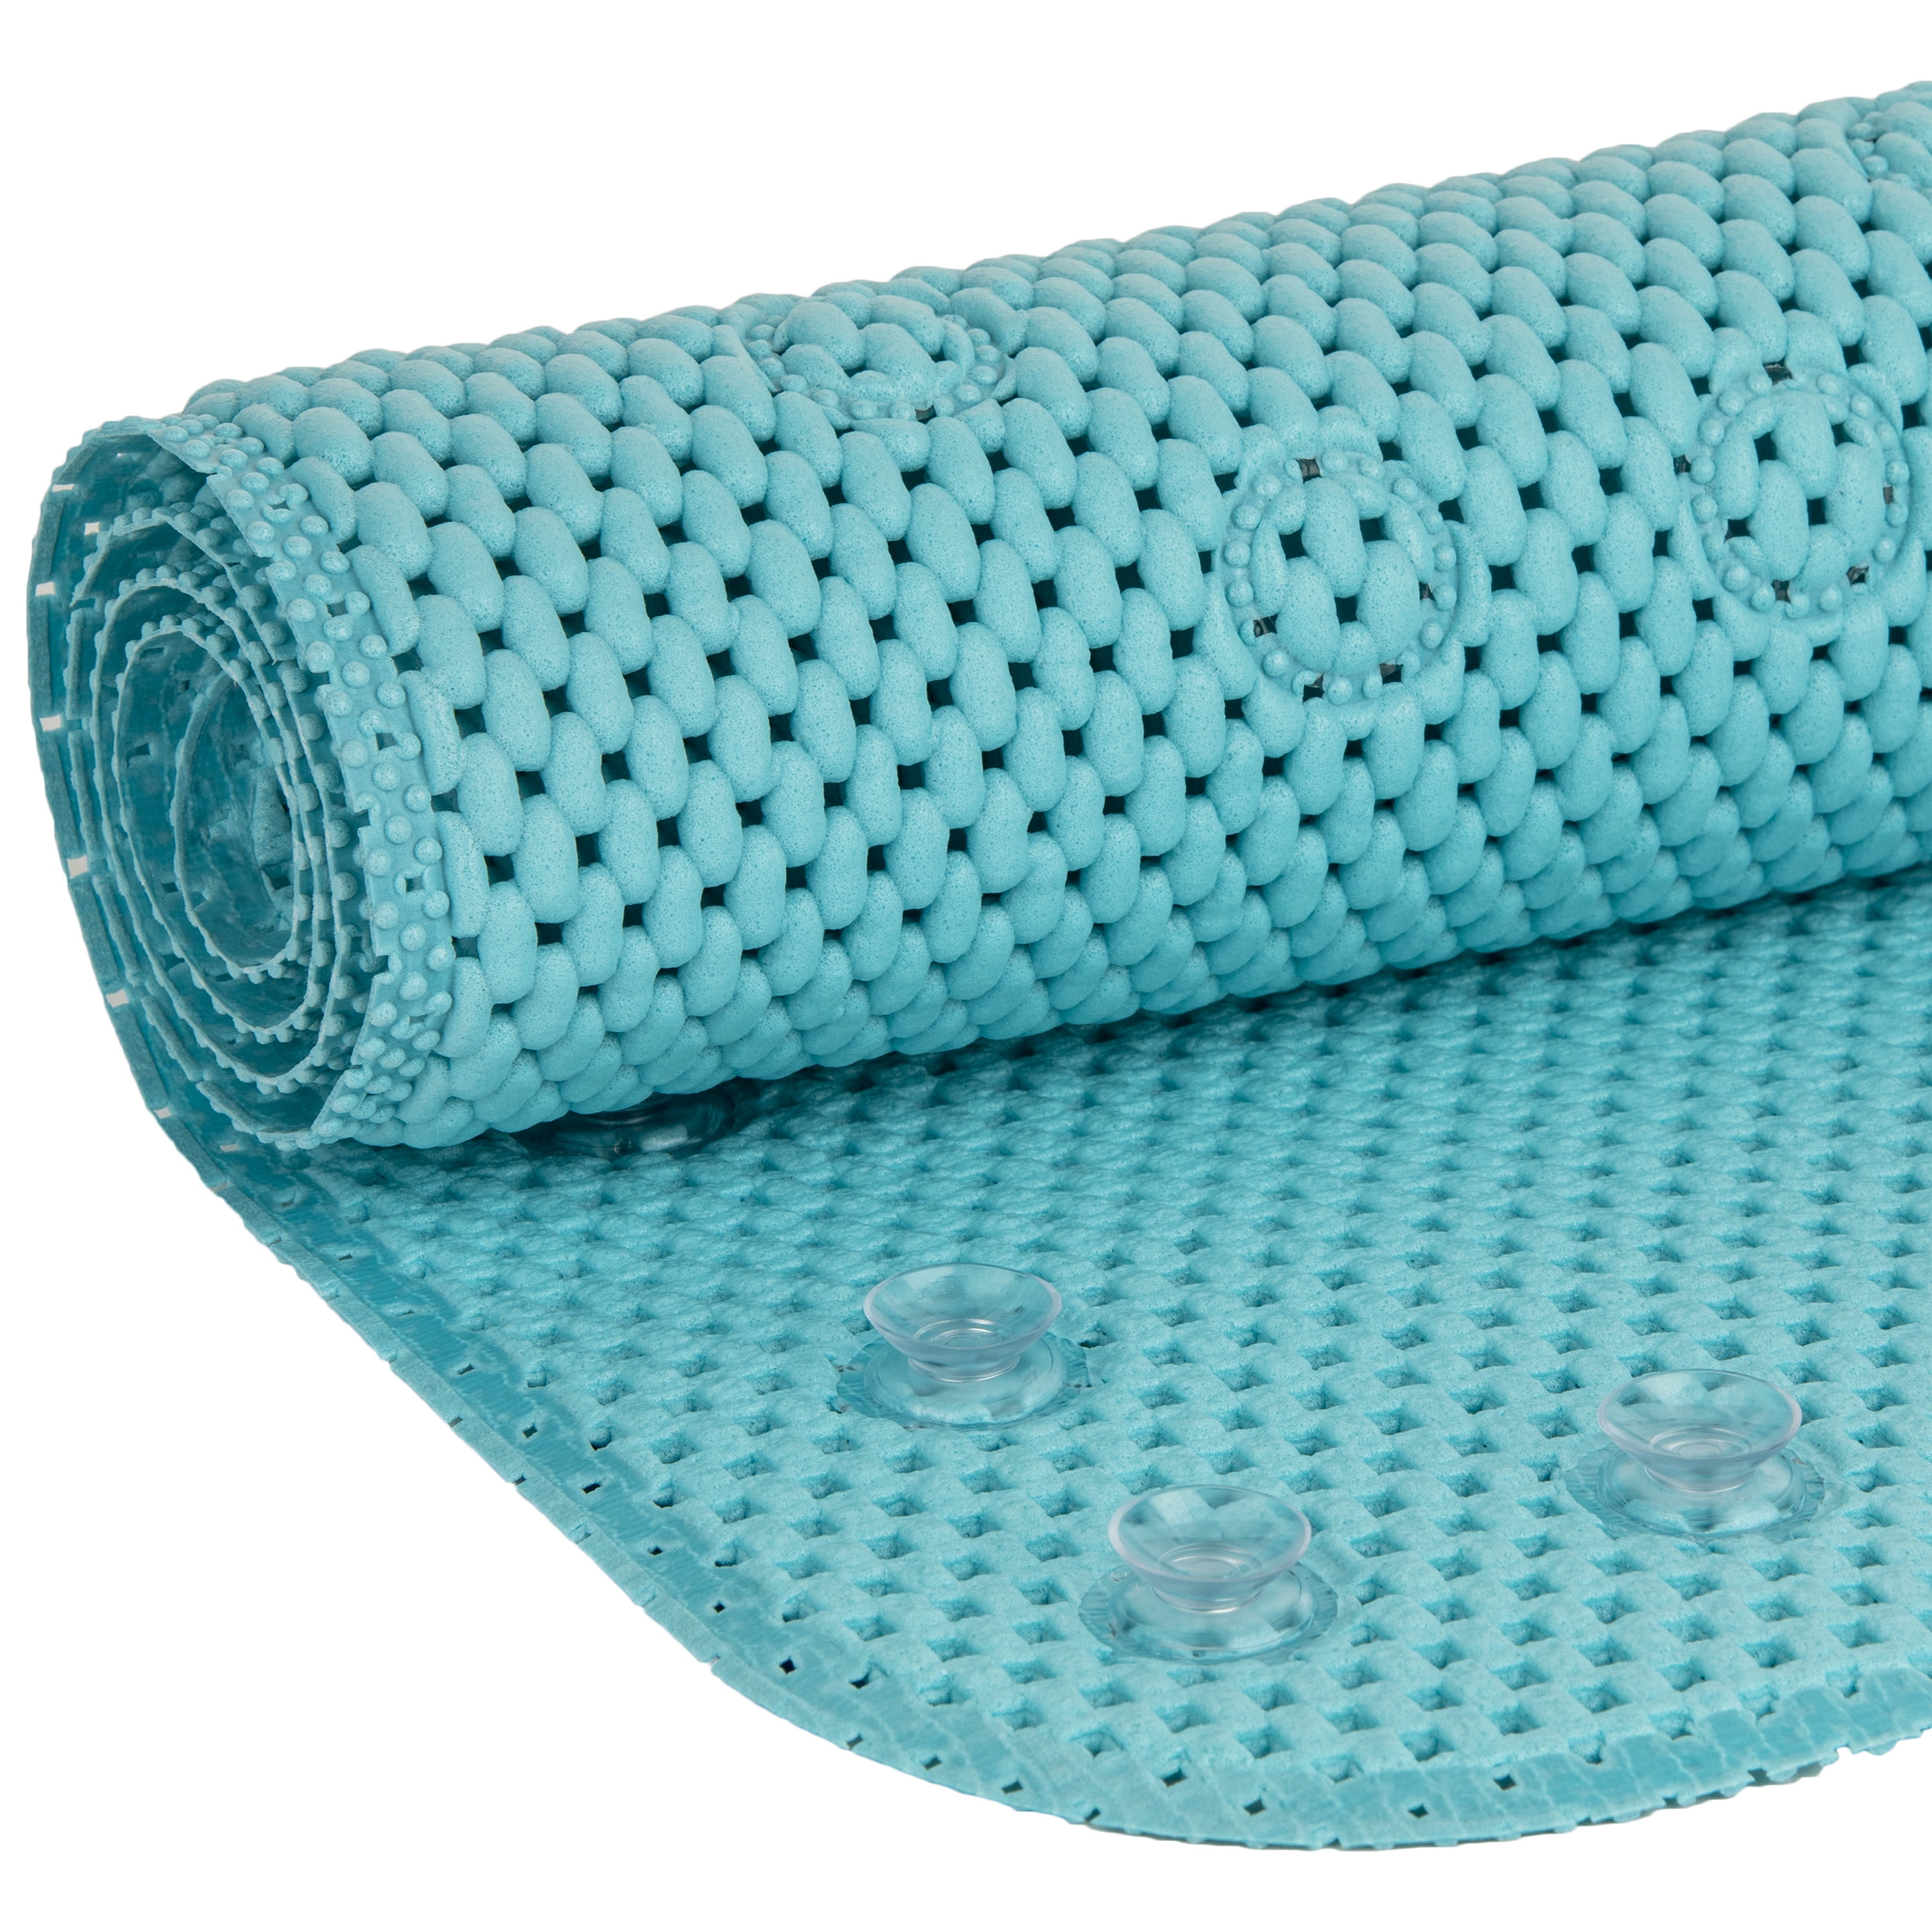 Clorox by Duck Brand Cushioned Foam Bathtub Mat, Non Slip Bath Mat with  Suction For Comfort and Safety, 17 x 36, Sky Blue, 2 Pack